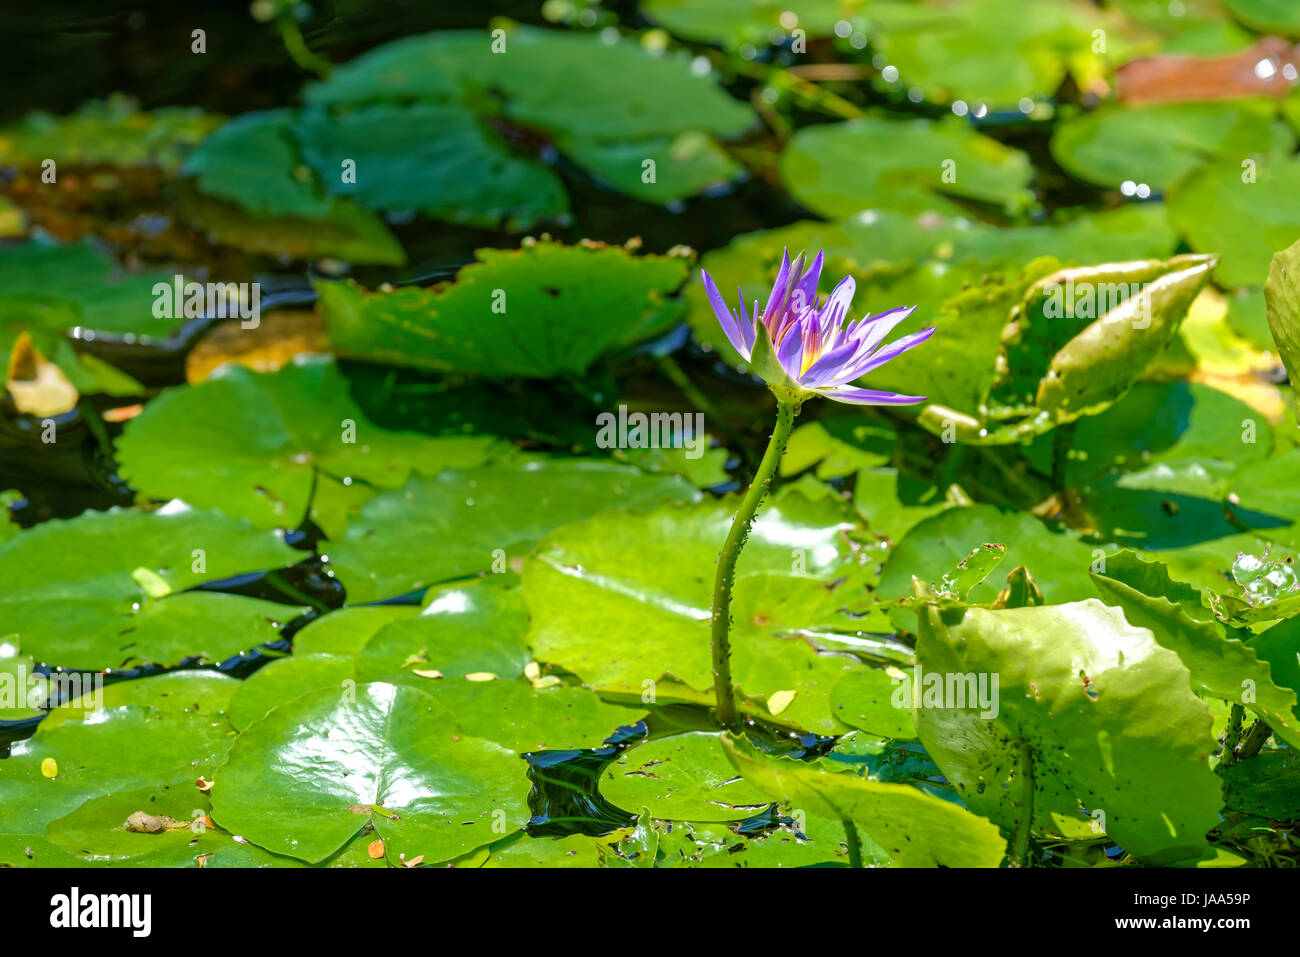 Pink Water Lily floating on the water between leaves and its stem covered insects Stock Photo